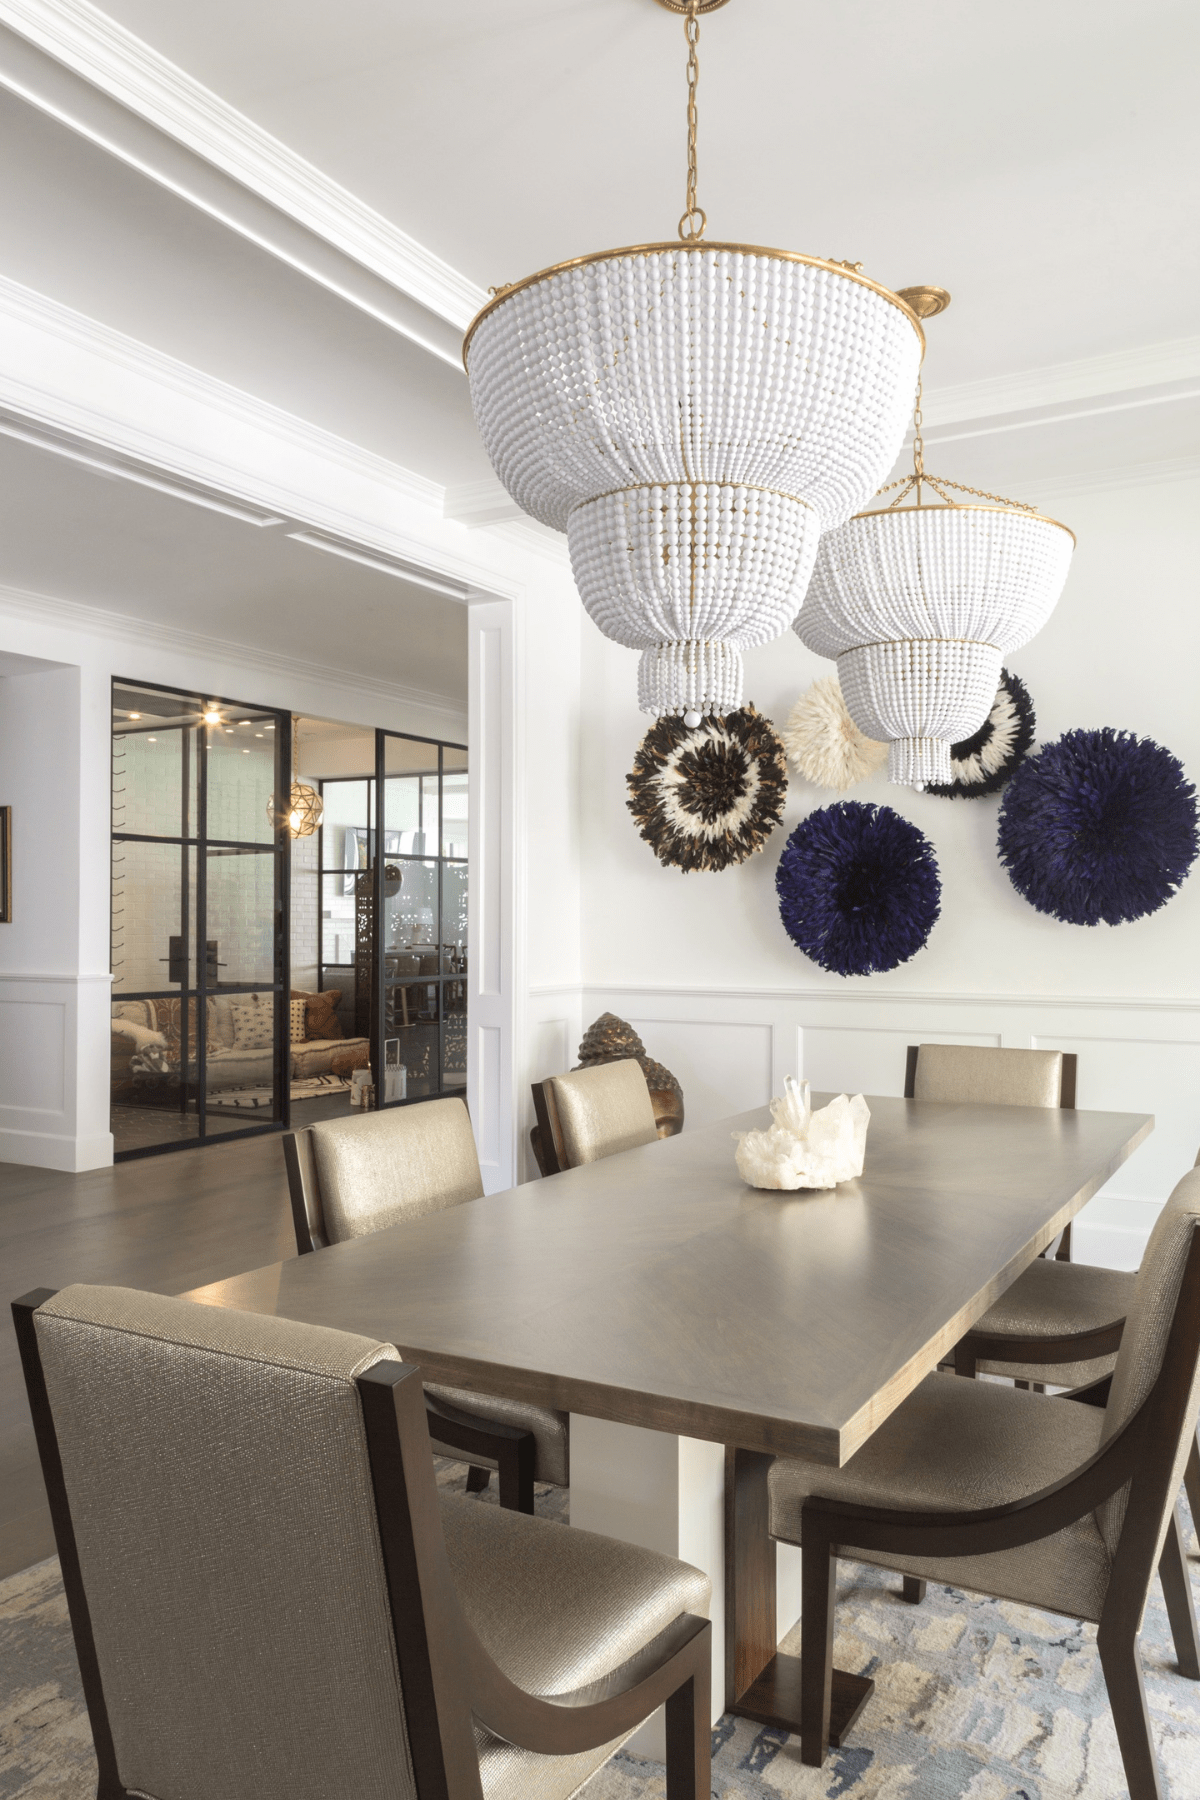 The Encino dining area with sleek furnishings and glamorous beaded chandeliers.